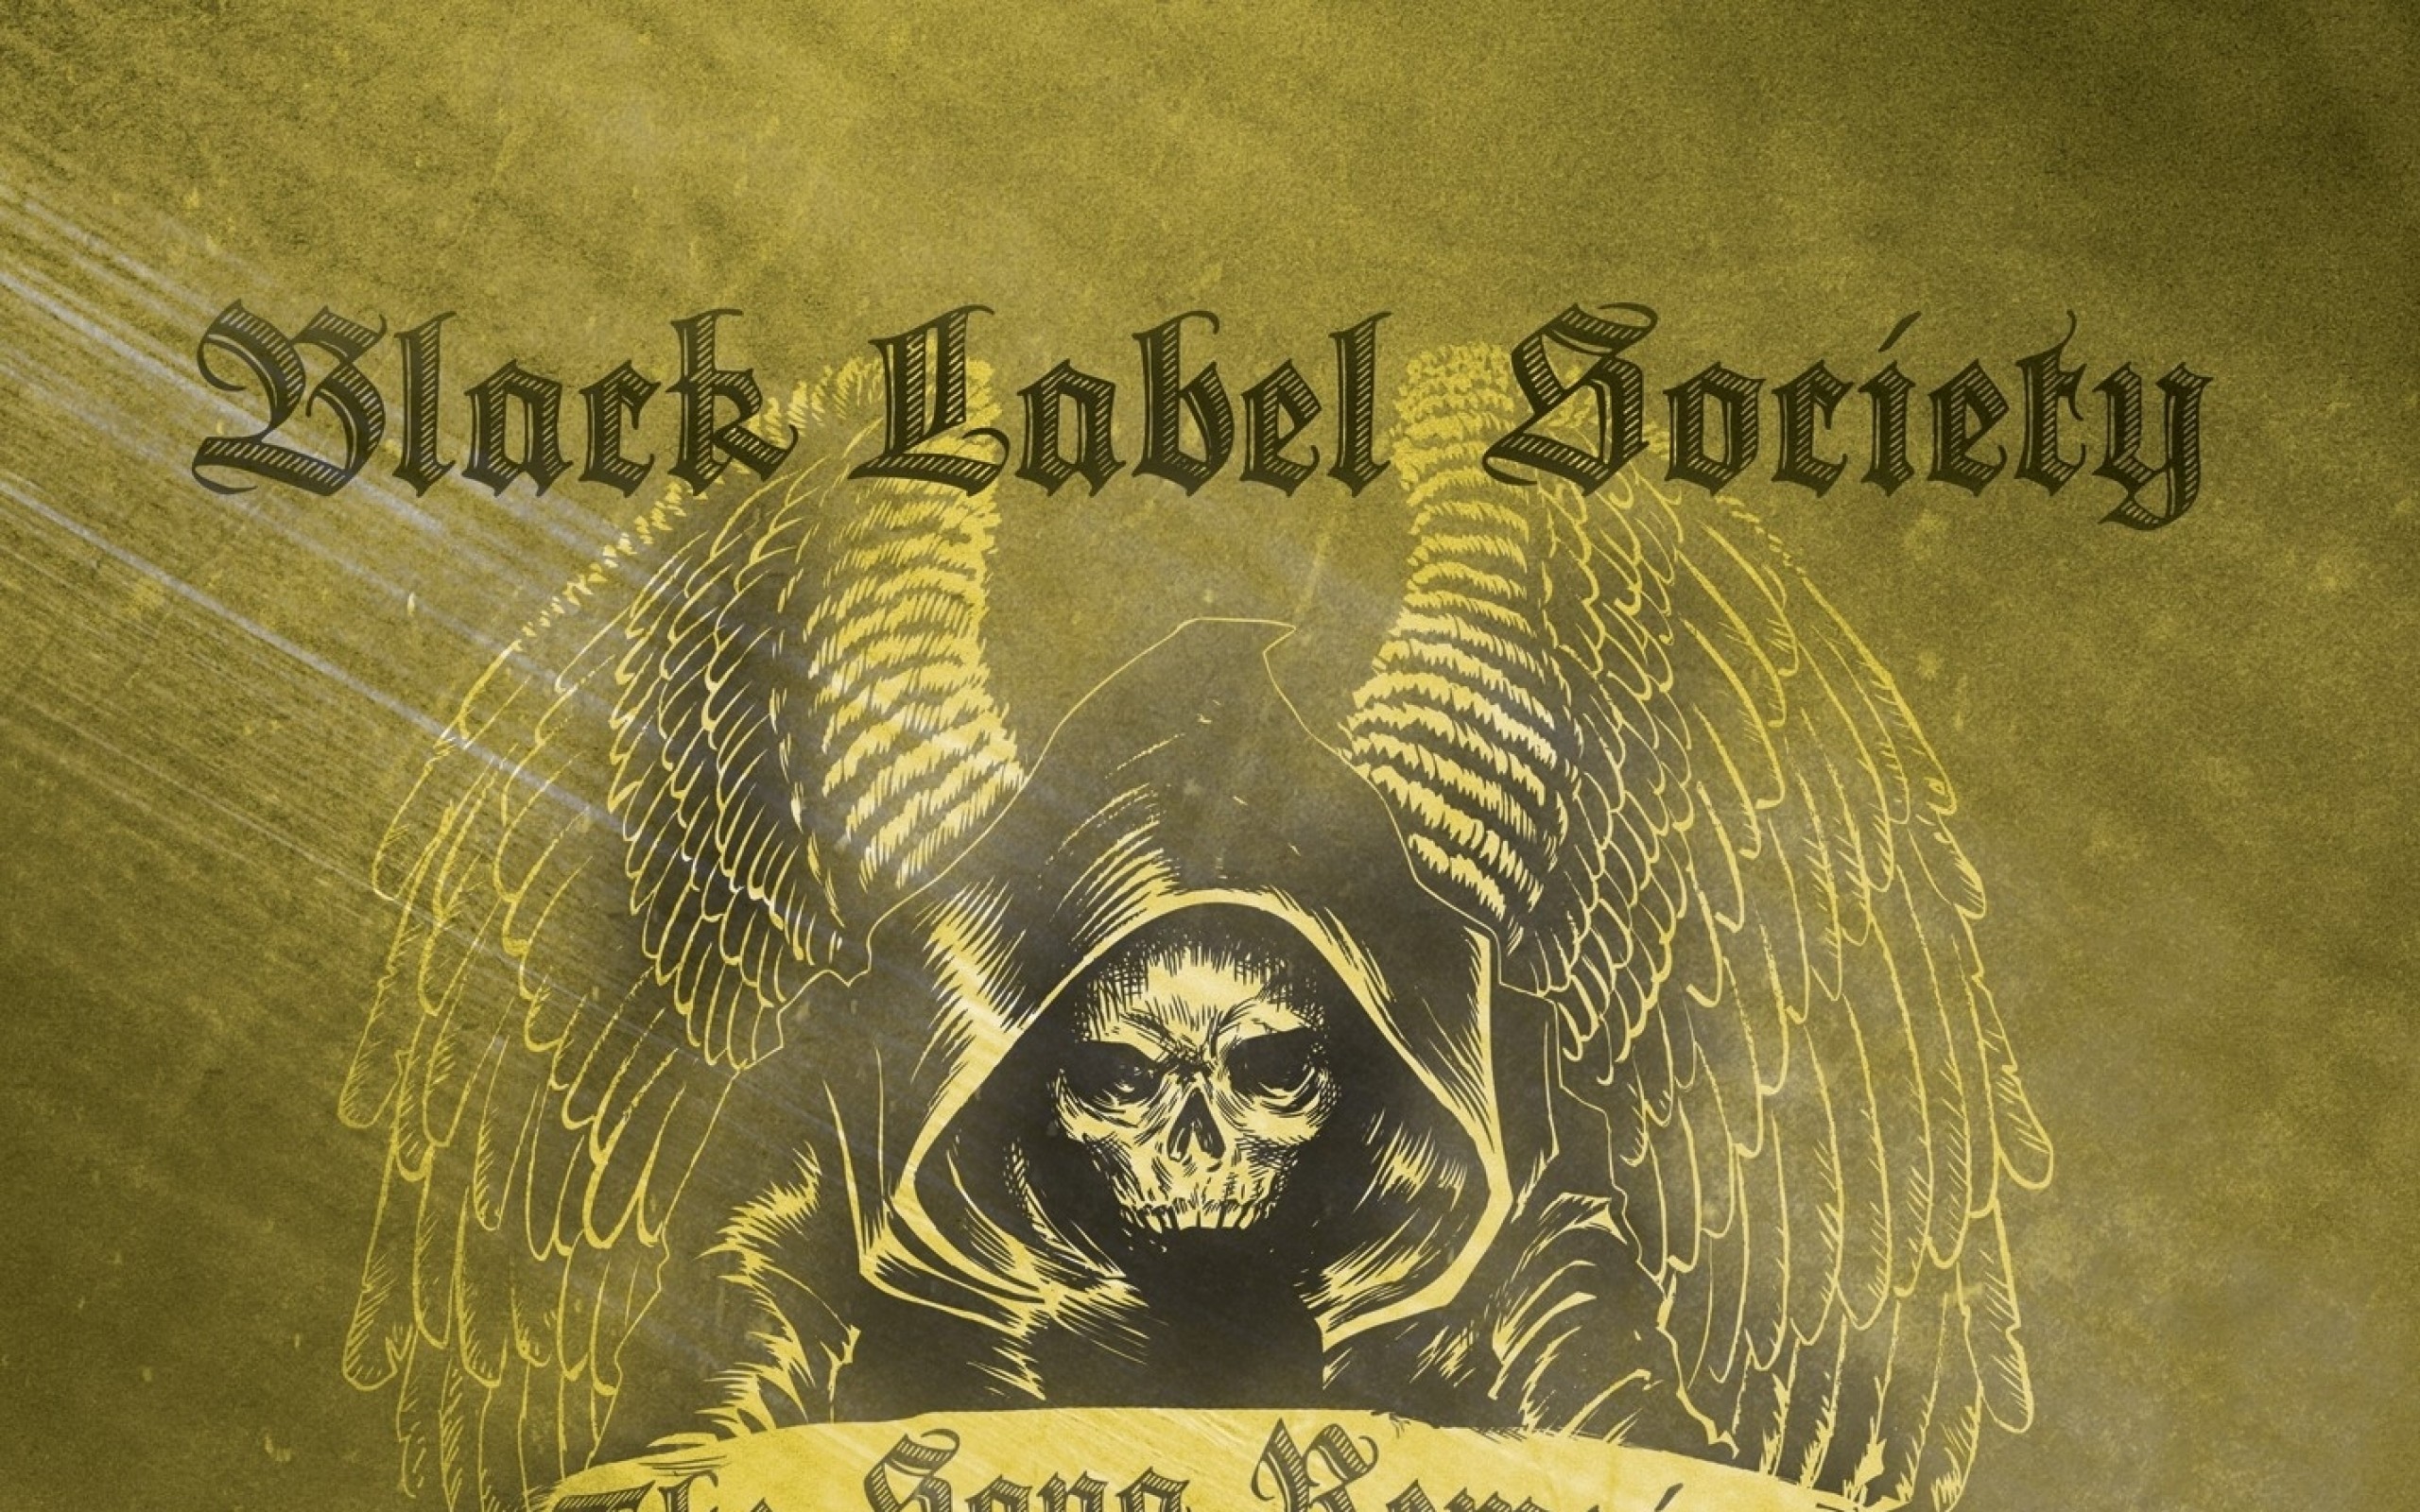 2560x1600 Download Wallpaper Â· Back. song remains album covers black label society ...